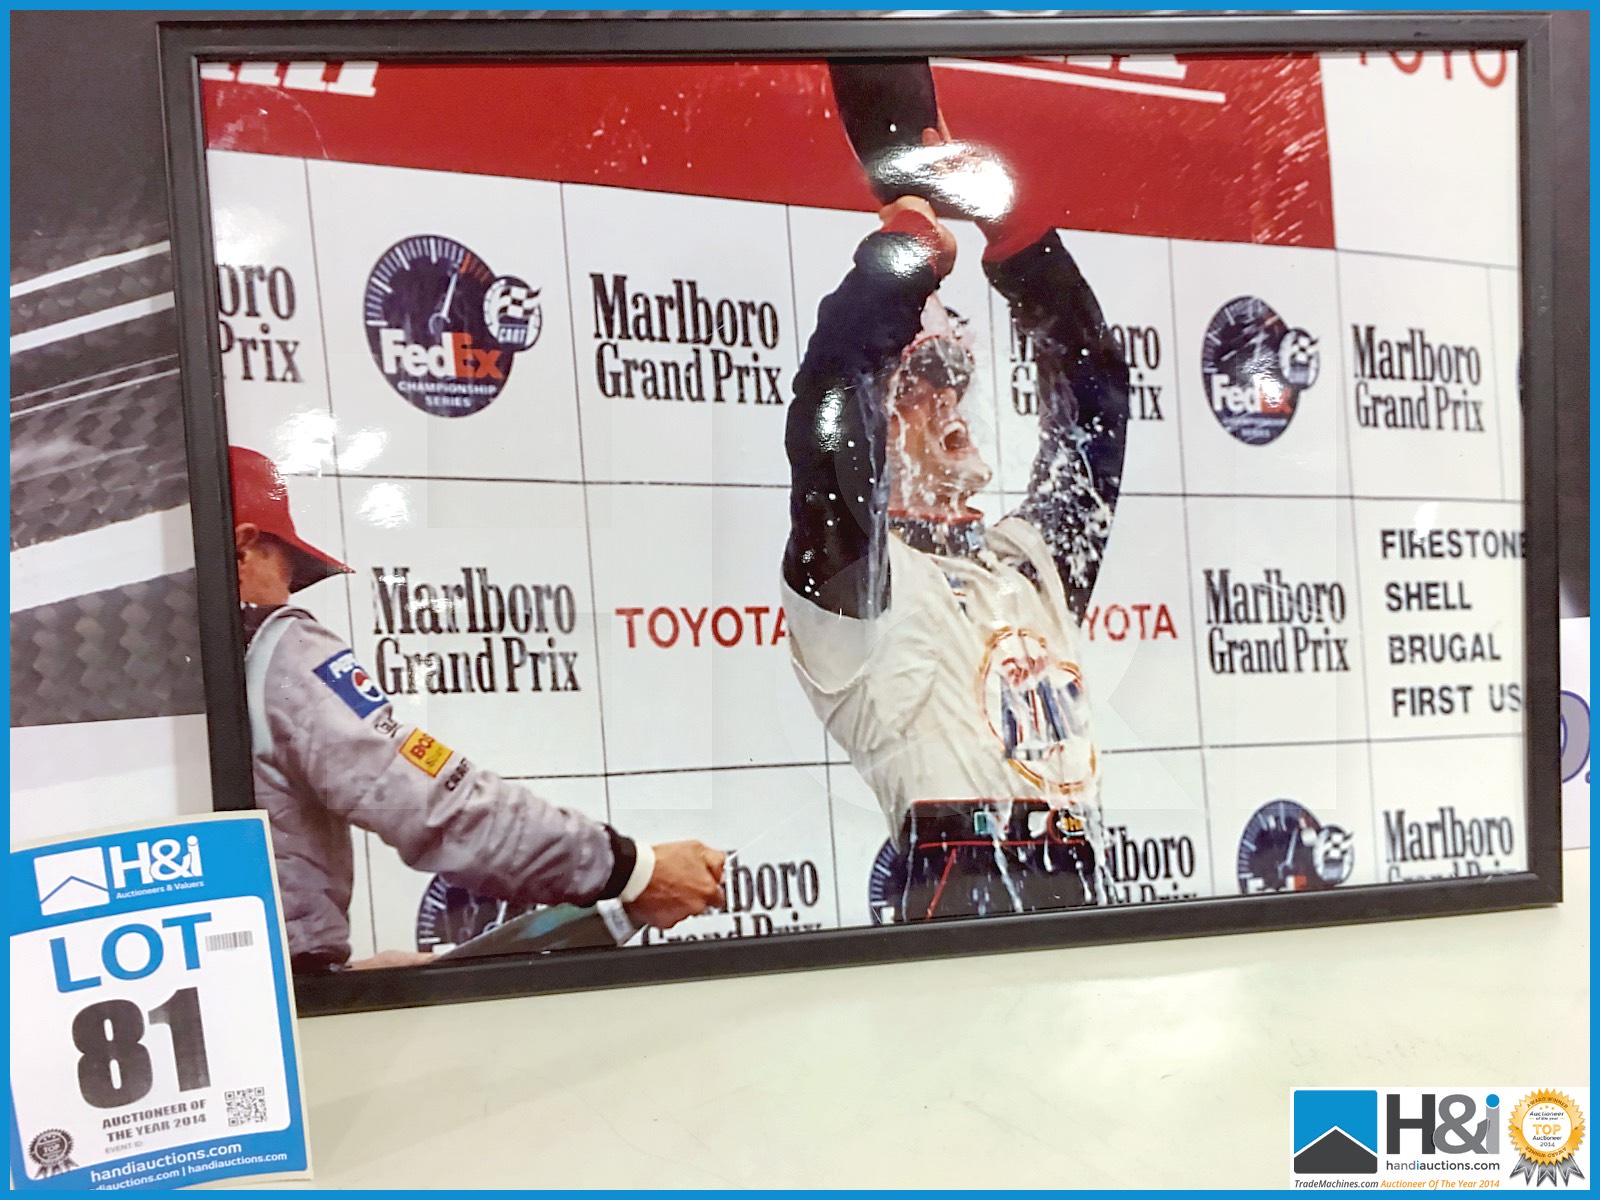 Framed photo of IndyCar podium win - 27in 18in. From the Cosworth Archives -- MC:N/A CILN:N/A